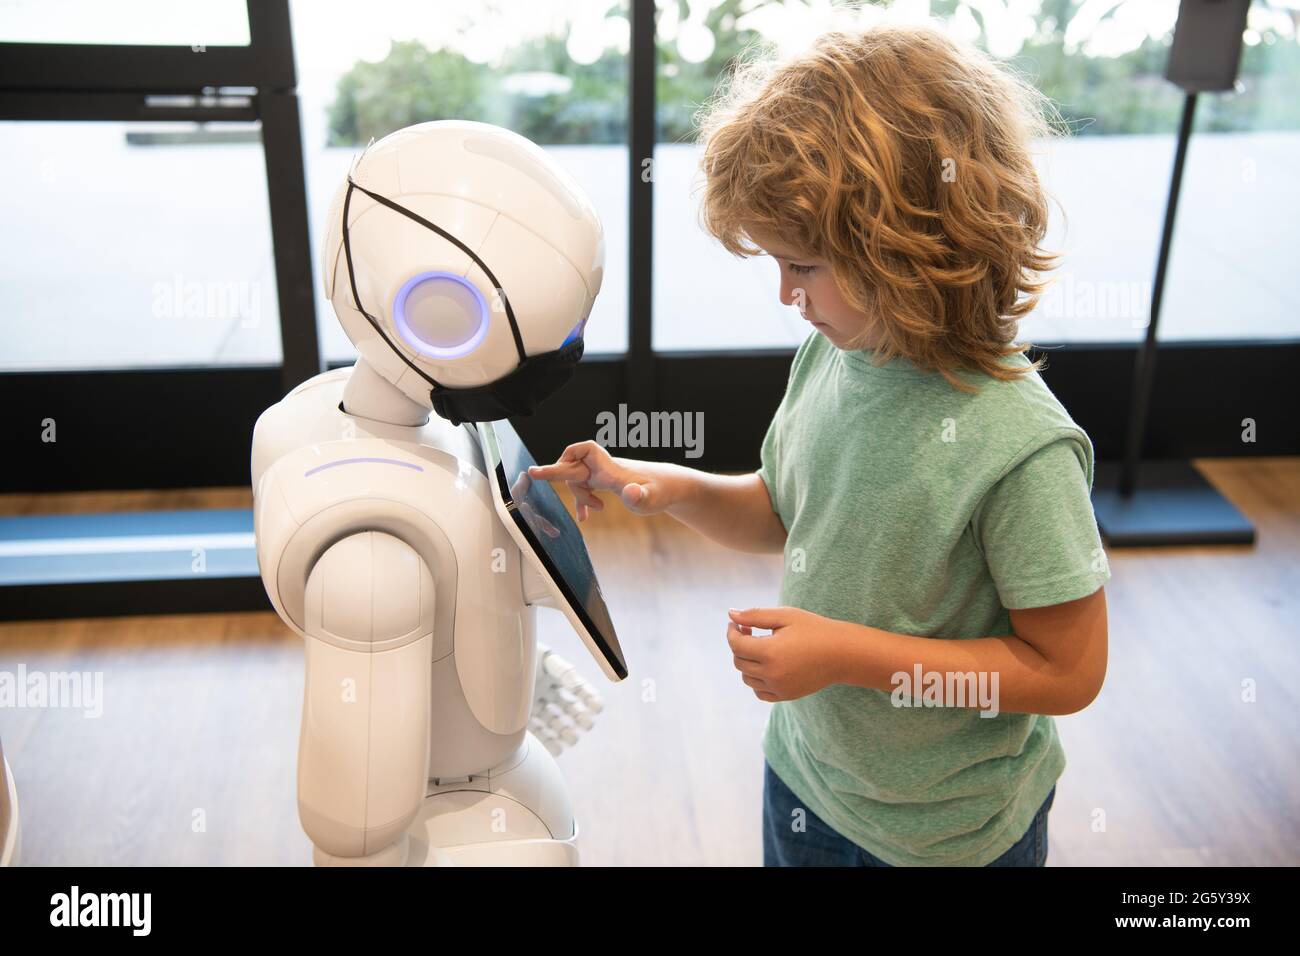 smart small boy communicate with robot assistant technology for modern education, robotics Stock Photo